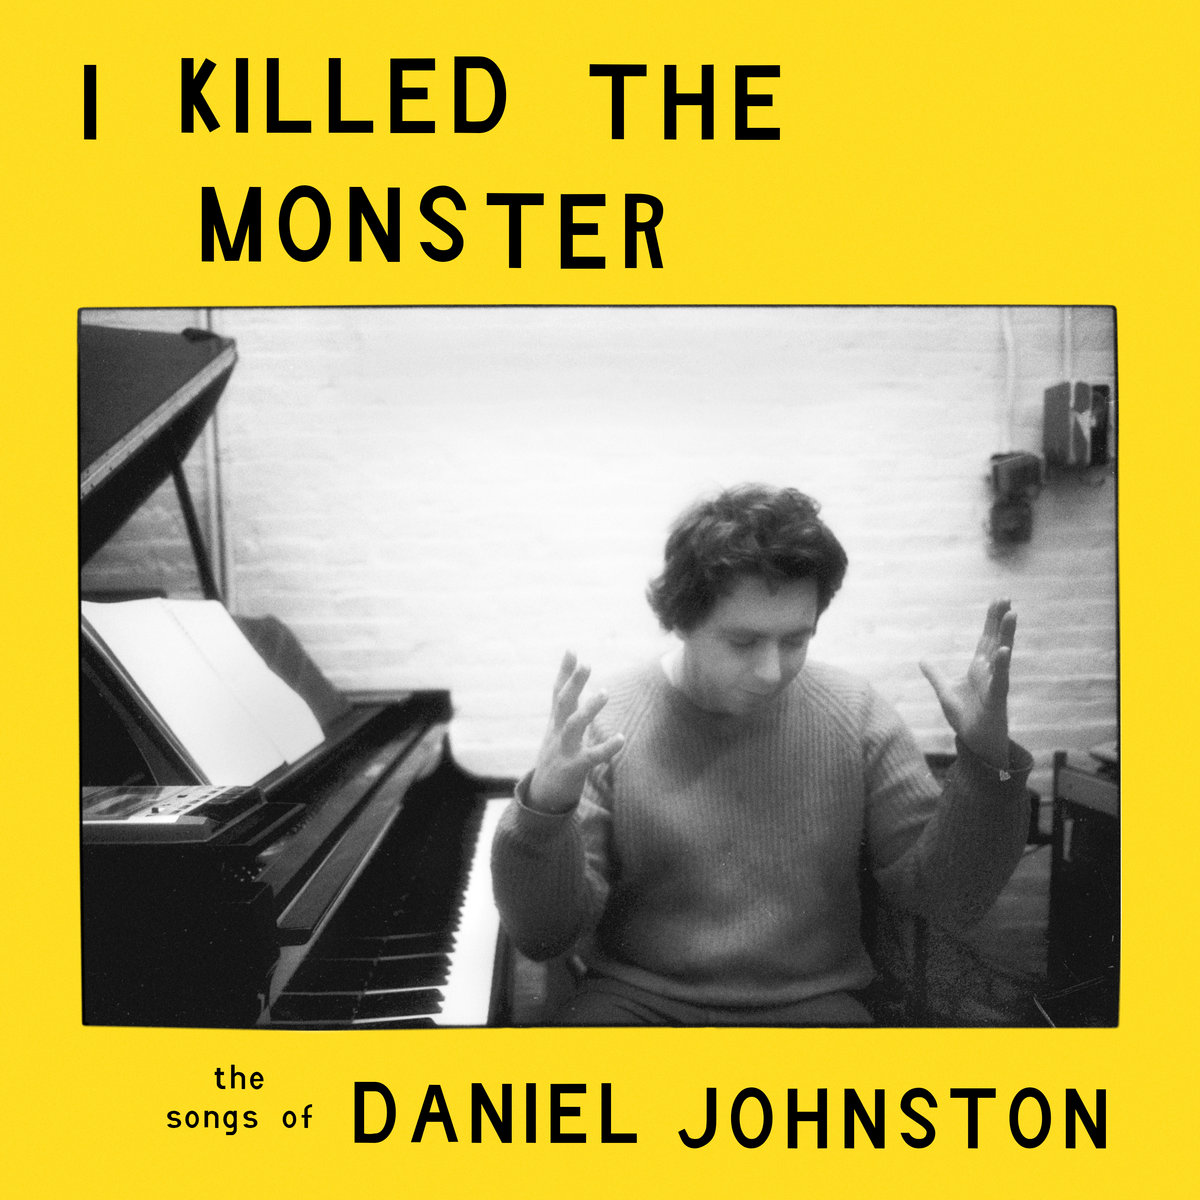 STEREO EMBERS VIDEO EXCLUSIVE – Kramer Accomplice Lumberob Gives Us a Visual of Daniel Johnston’s ‘Honey I Sure Miss You’ from the Reissued Vinyl Release of “I Killed The Monster: The Songs of Daniel Johnston”